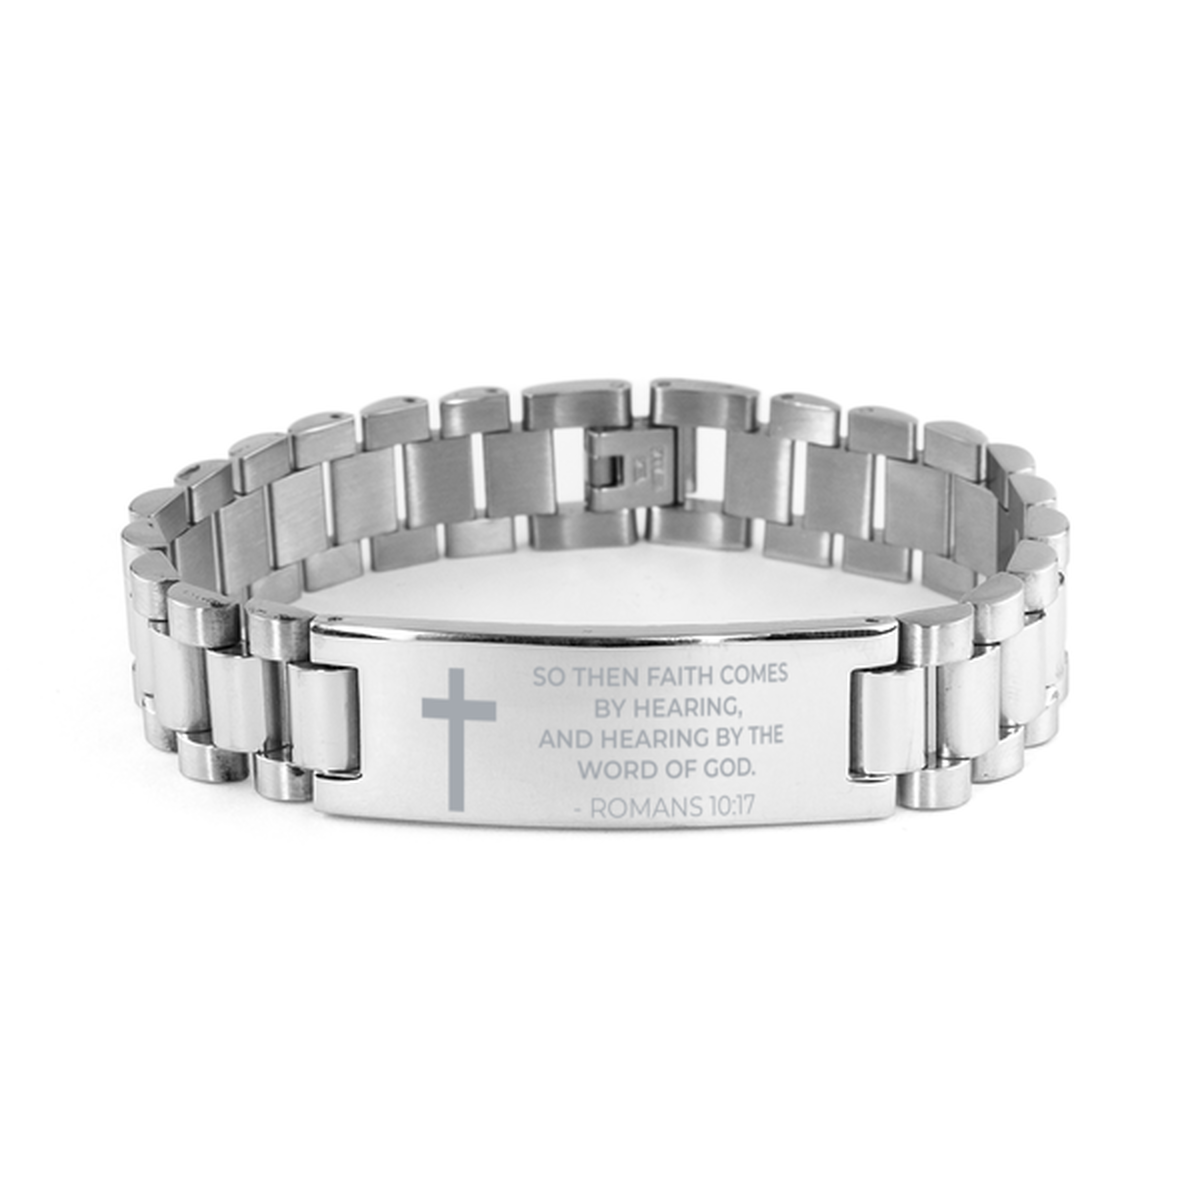 Christian Ladder Stainless Steel Bracelet, Romans 10:17 So Then Faith Comes By Hearing, And Hearing By, Motivational Bible Verse Gifts For Men Women